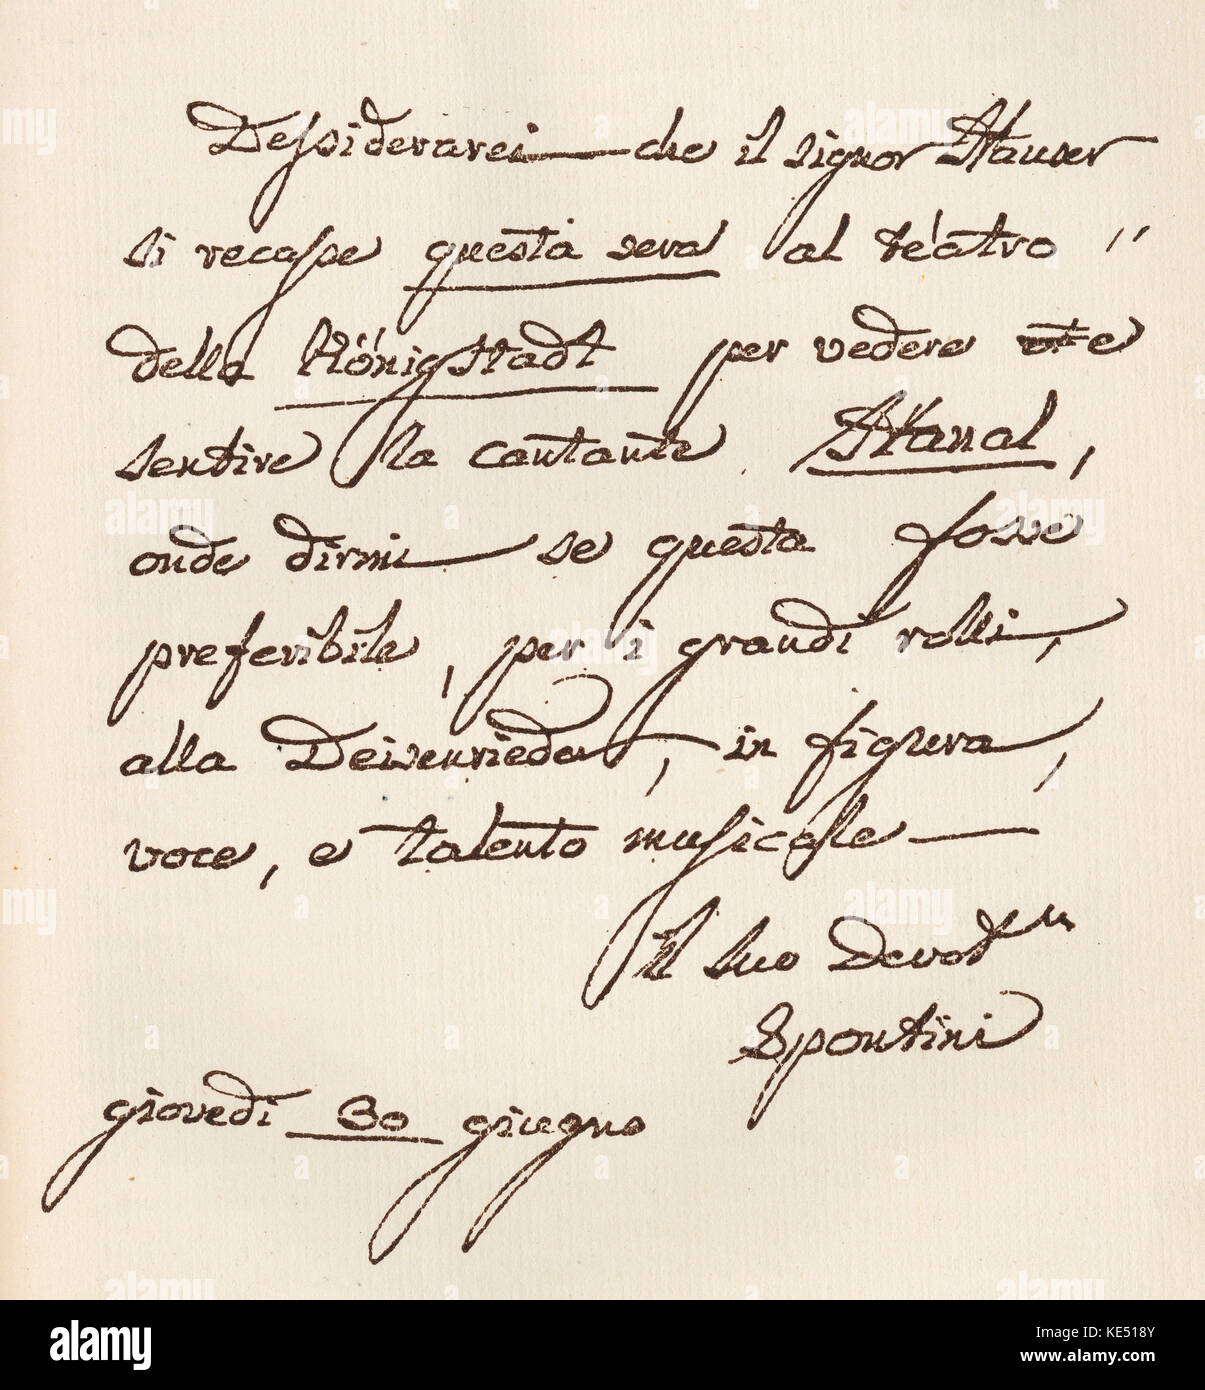 Gaspare Spontini - letter written and signed by the Italian opera composer and conductor. GS: 14 November 1774 - 24 January 1851. Translation: 'I should be obliged if Signor Hauser would come this evening to the Königstadt Theatre to see and hear the singer Hanal, in order to tell me whether she would be preferable, in grand rôles, to D-----, as regards figure, voice, and musical talent.  Yours devotedly, Spontini.  Thursday, 30 June.' Stock Photo